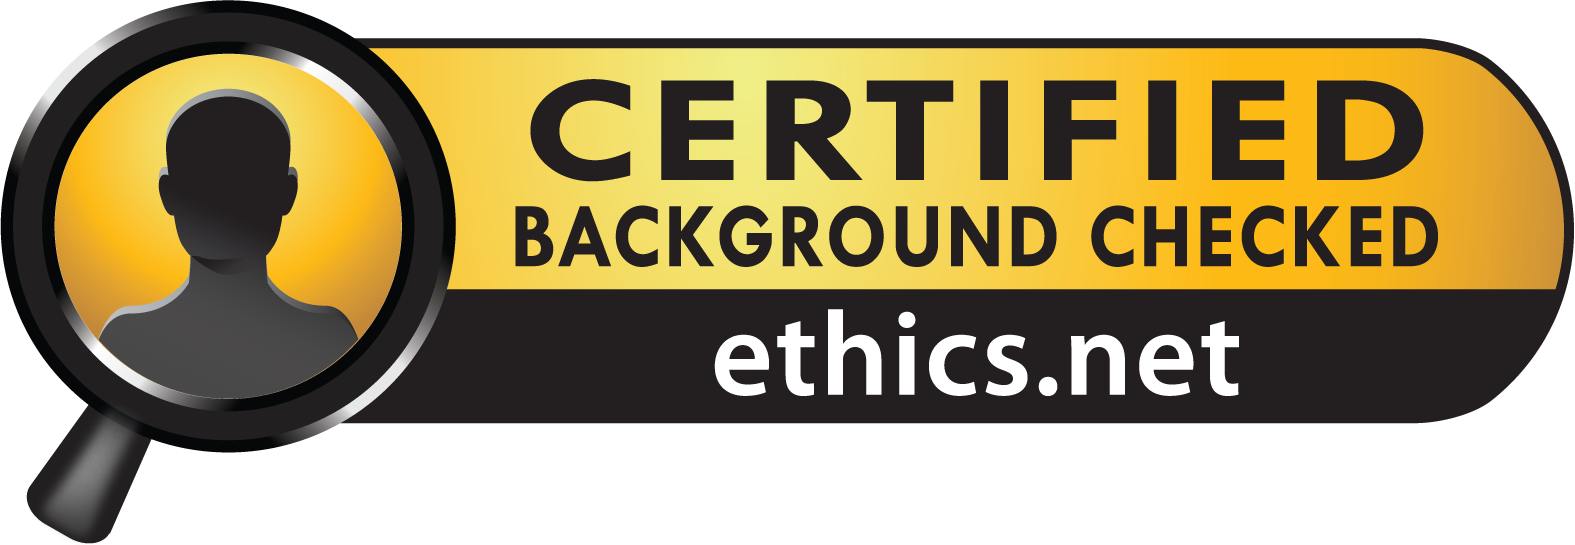 Certified background checked by ethics.net